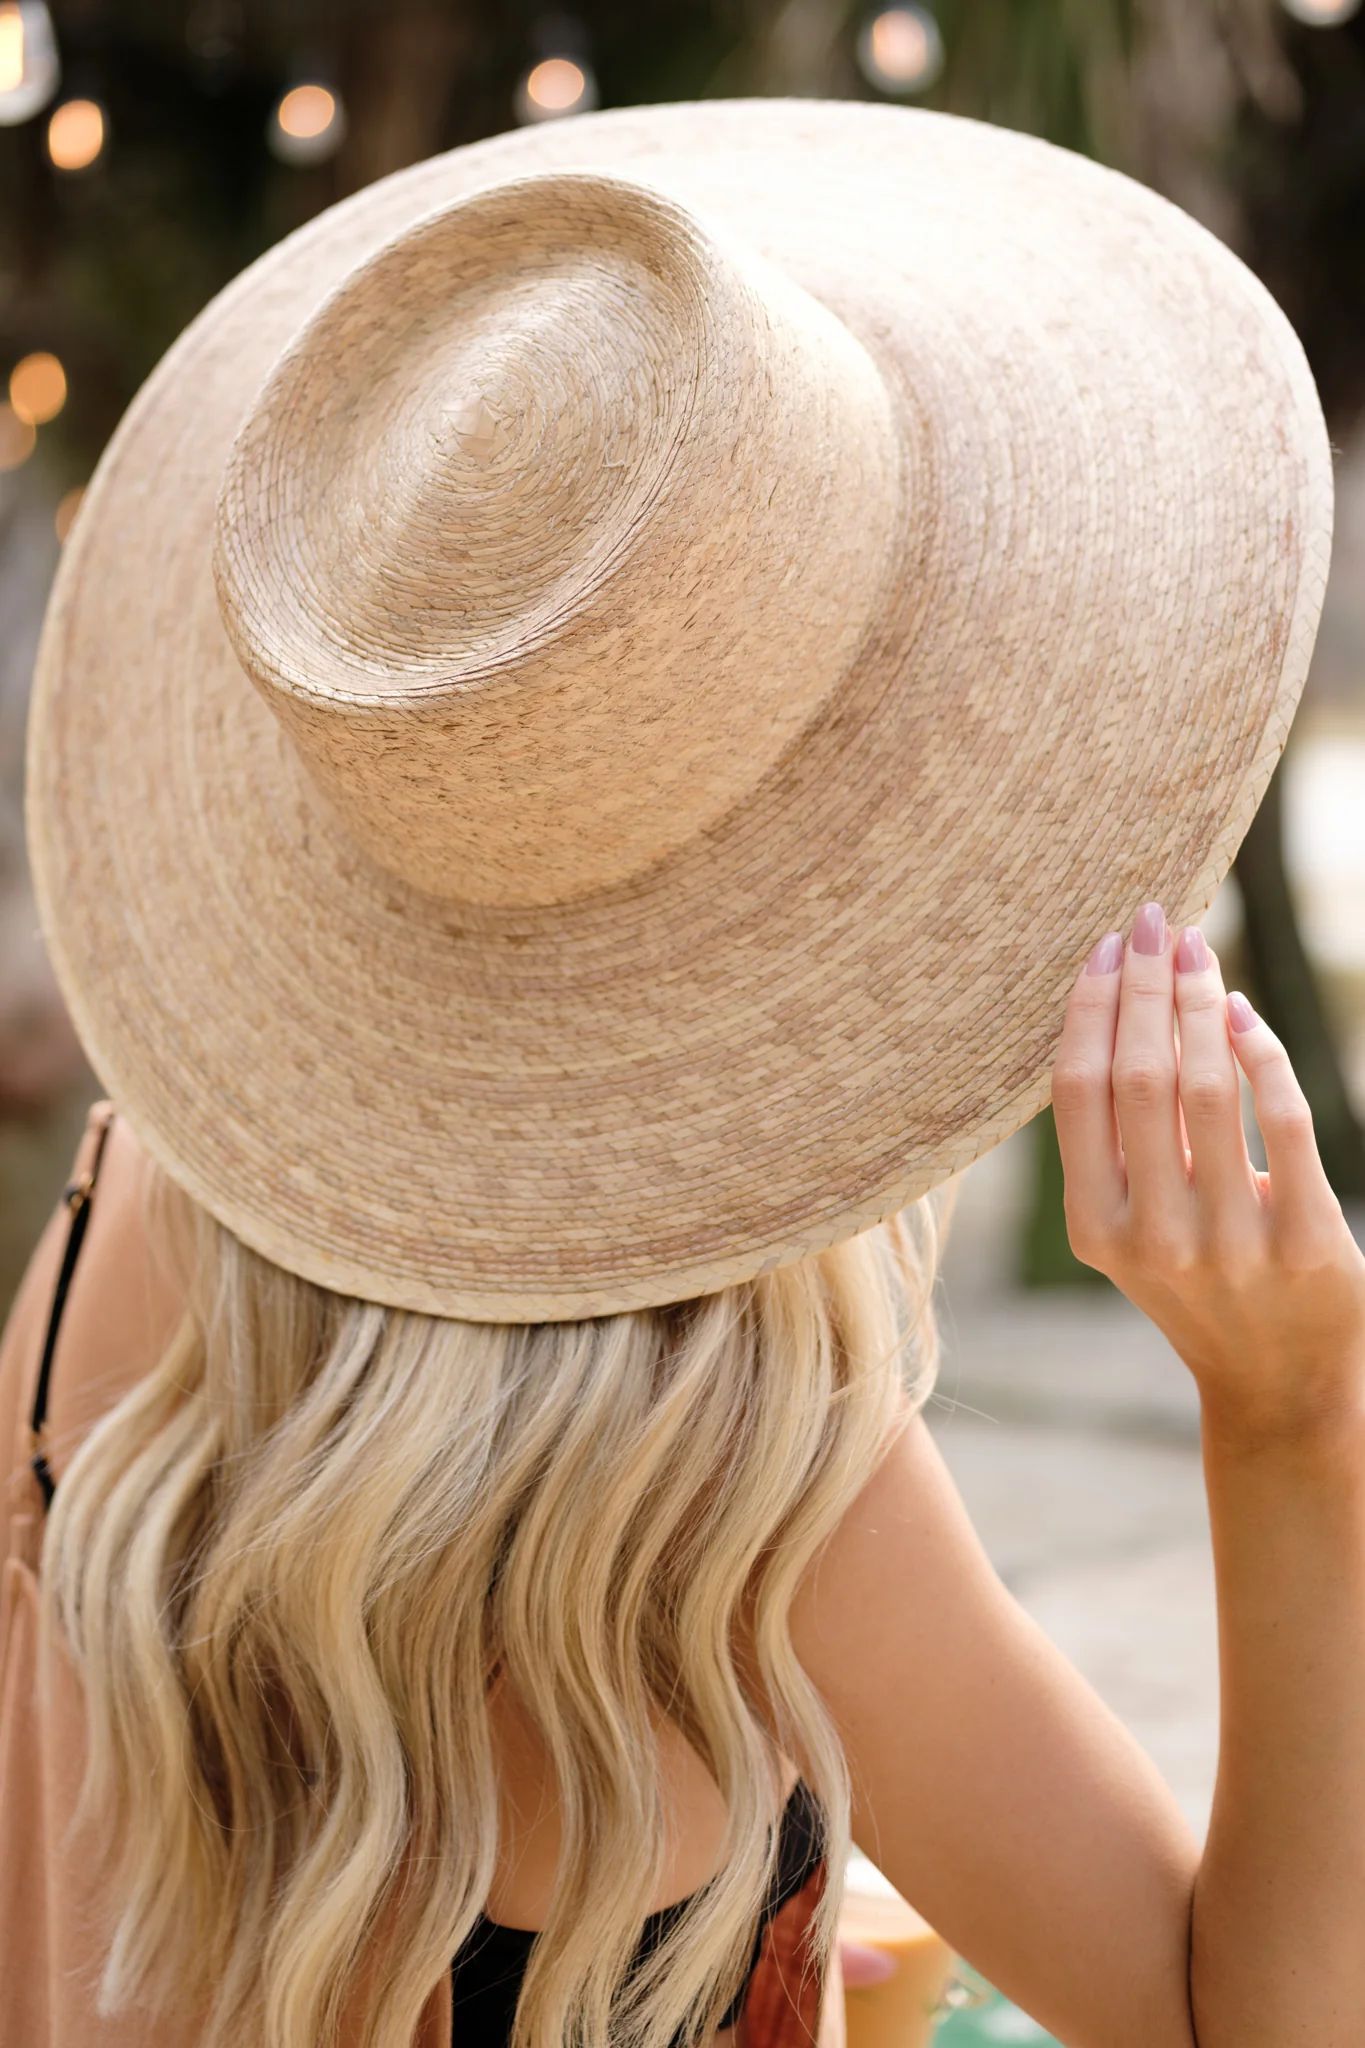 Palma Natural Wide Boater Hat | Red Dress 